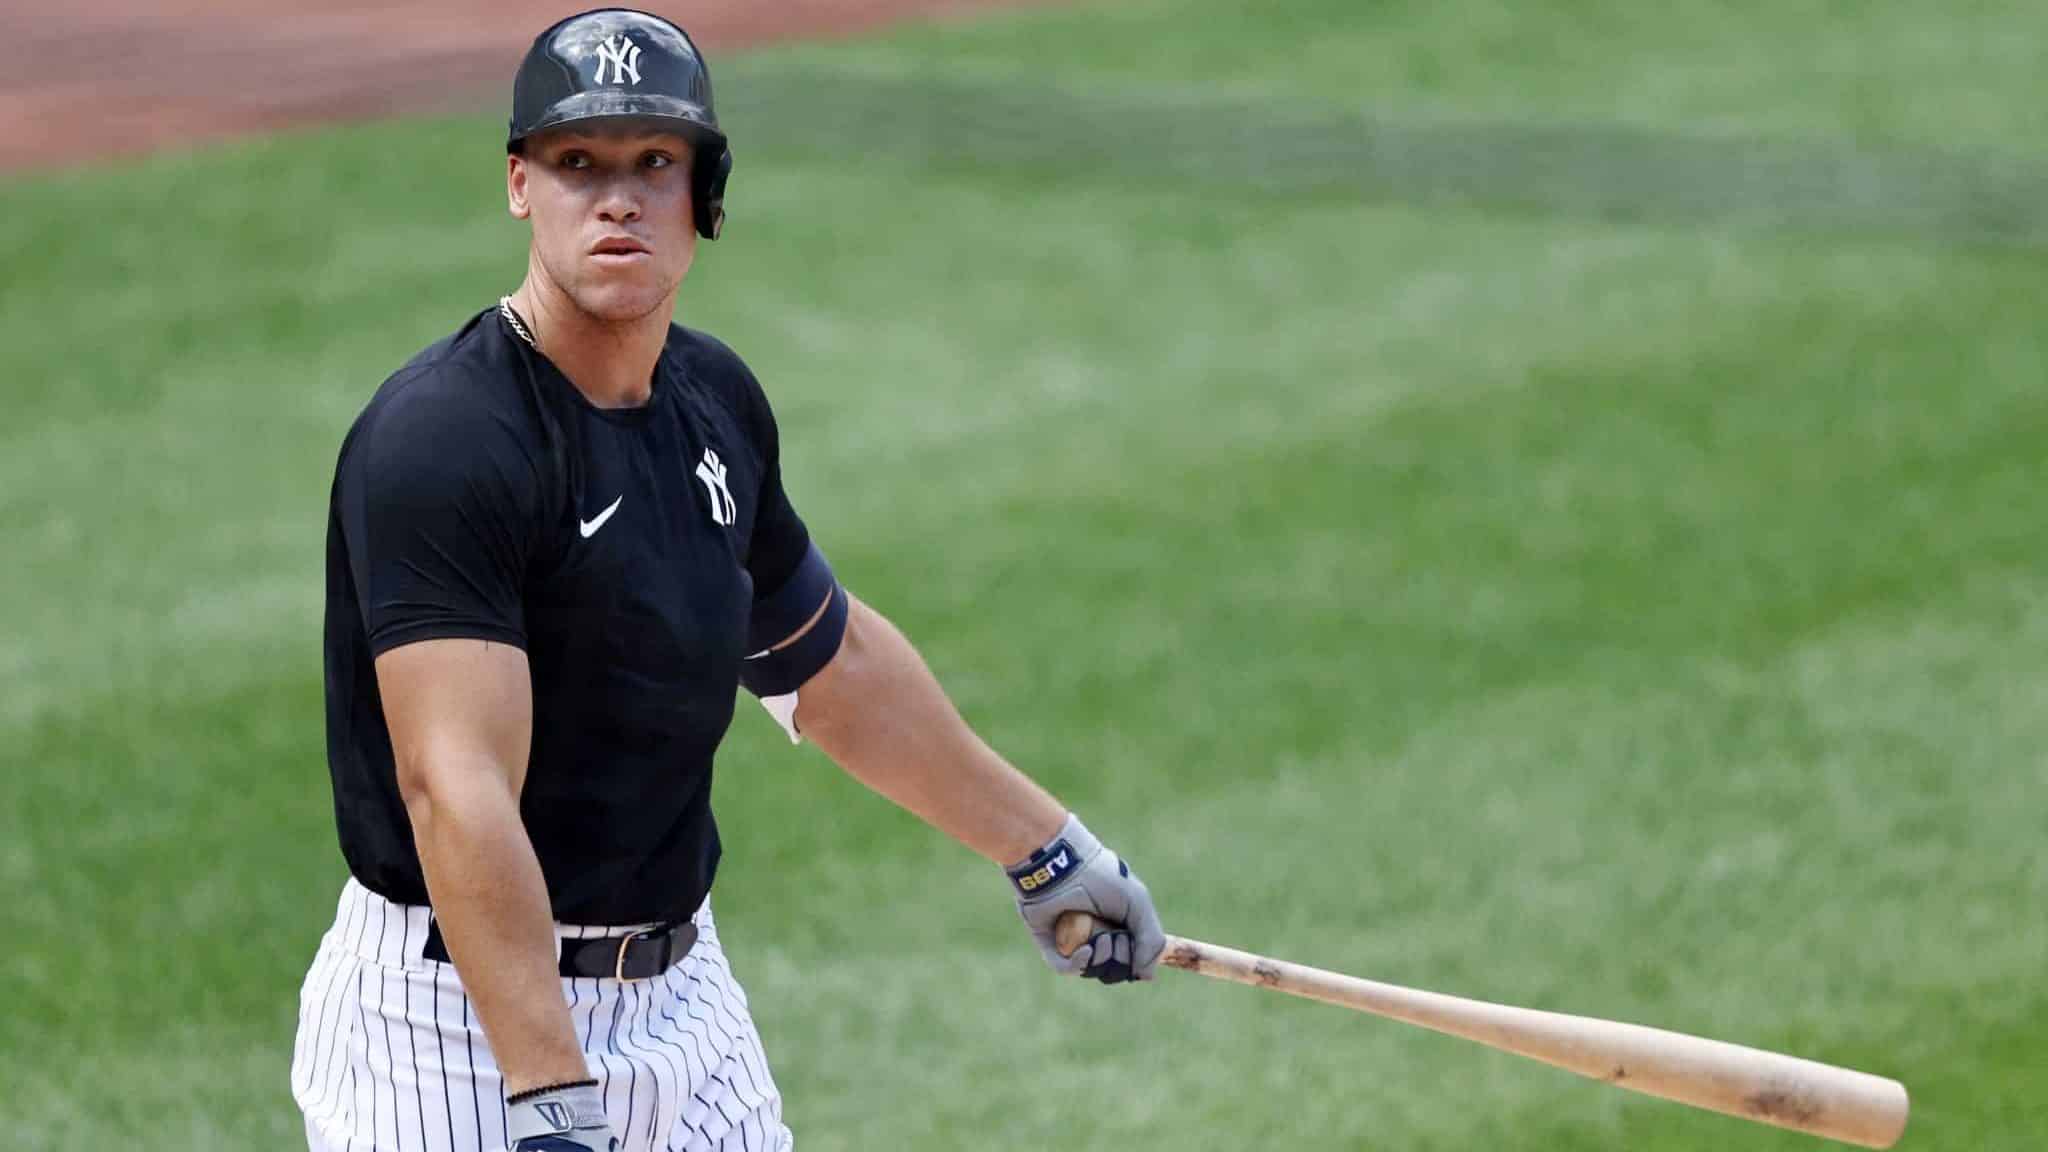 NEW YORK, NEW YORK - JULY 04: Aaron Judge #99 of the New York Yankees hits during summer workouts at Yankee Stadium on July 04, 2020 in the Bronx borough of New York City.